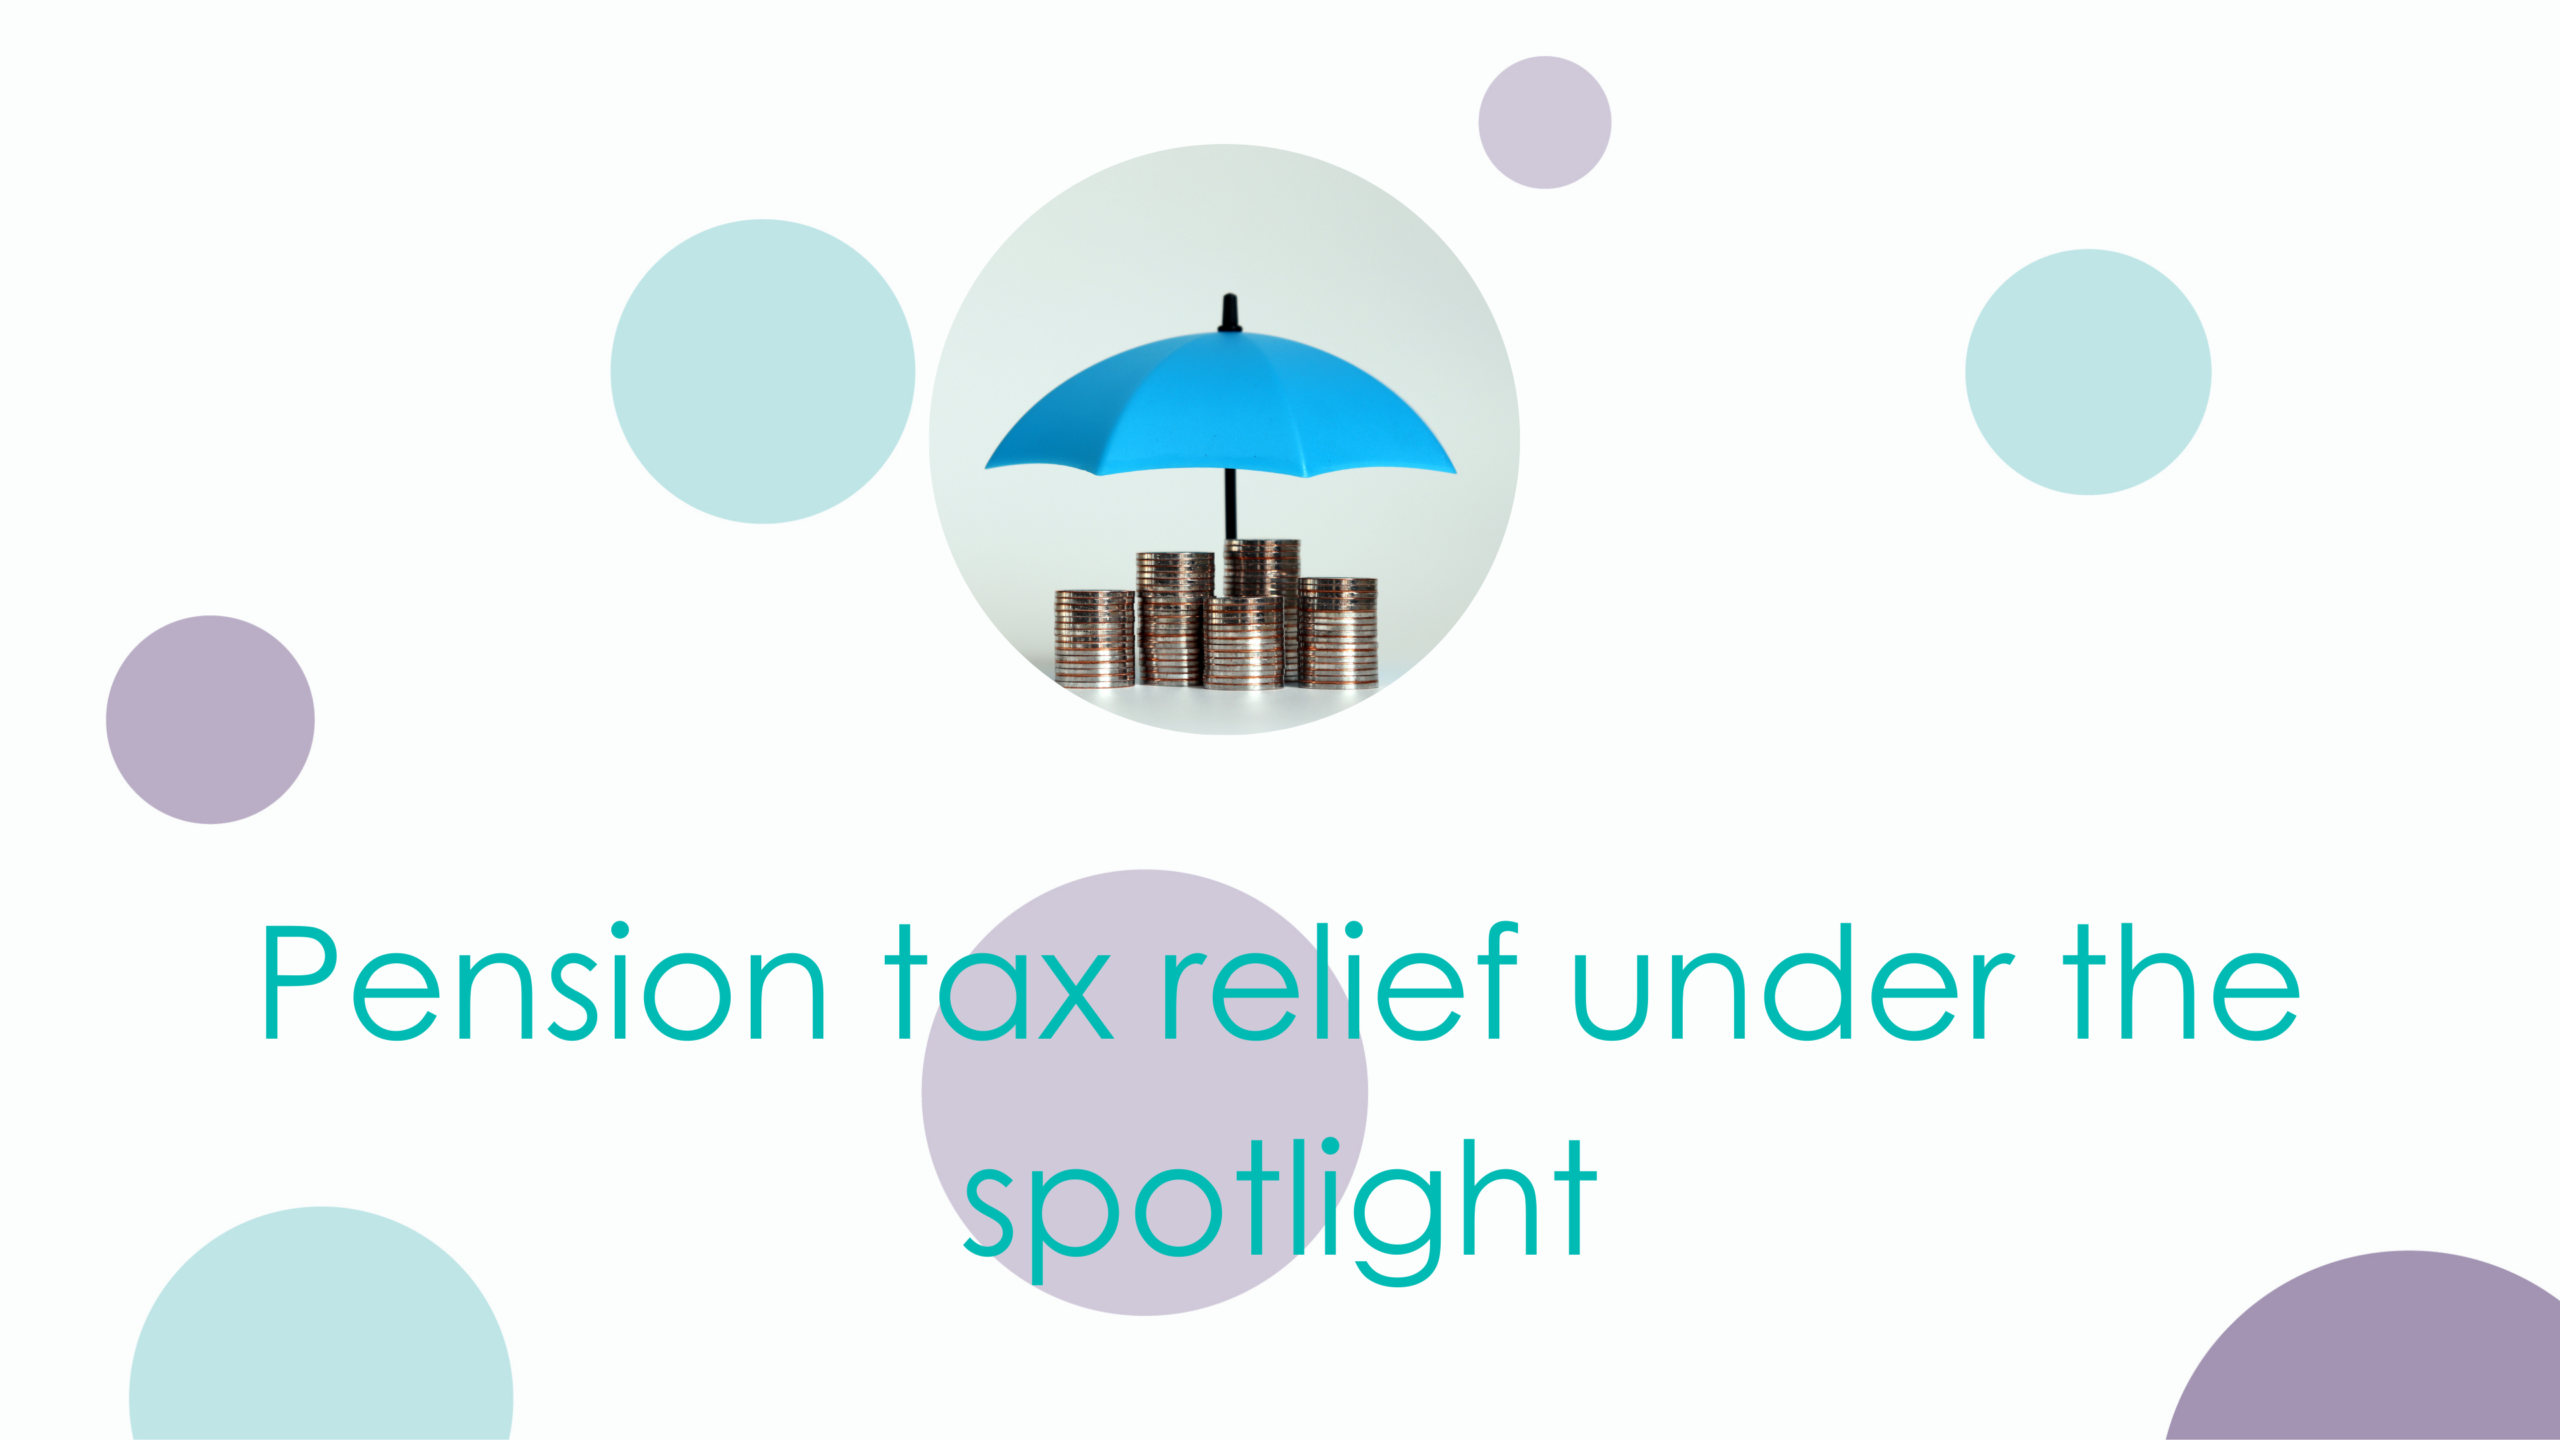 Pension tax relief under the spotlight